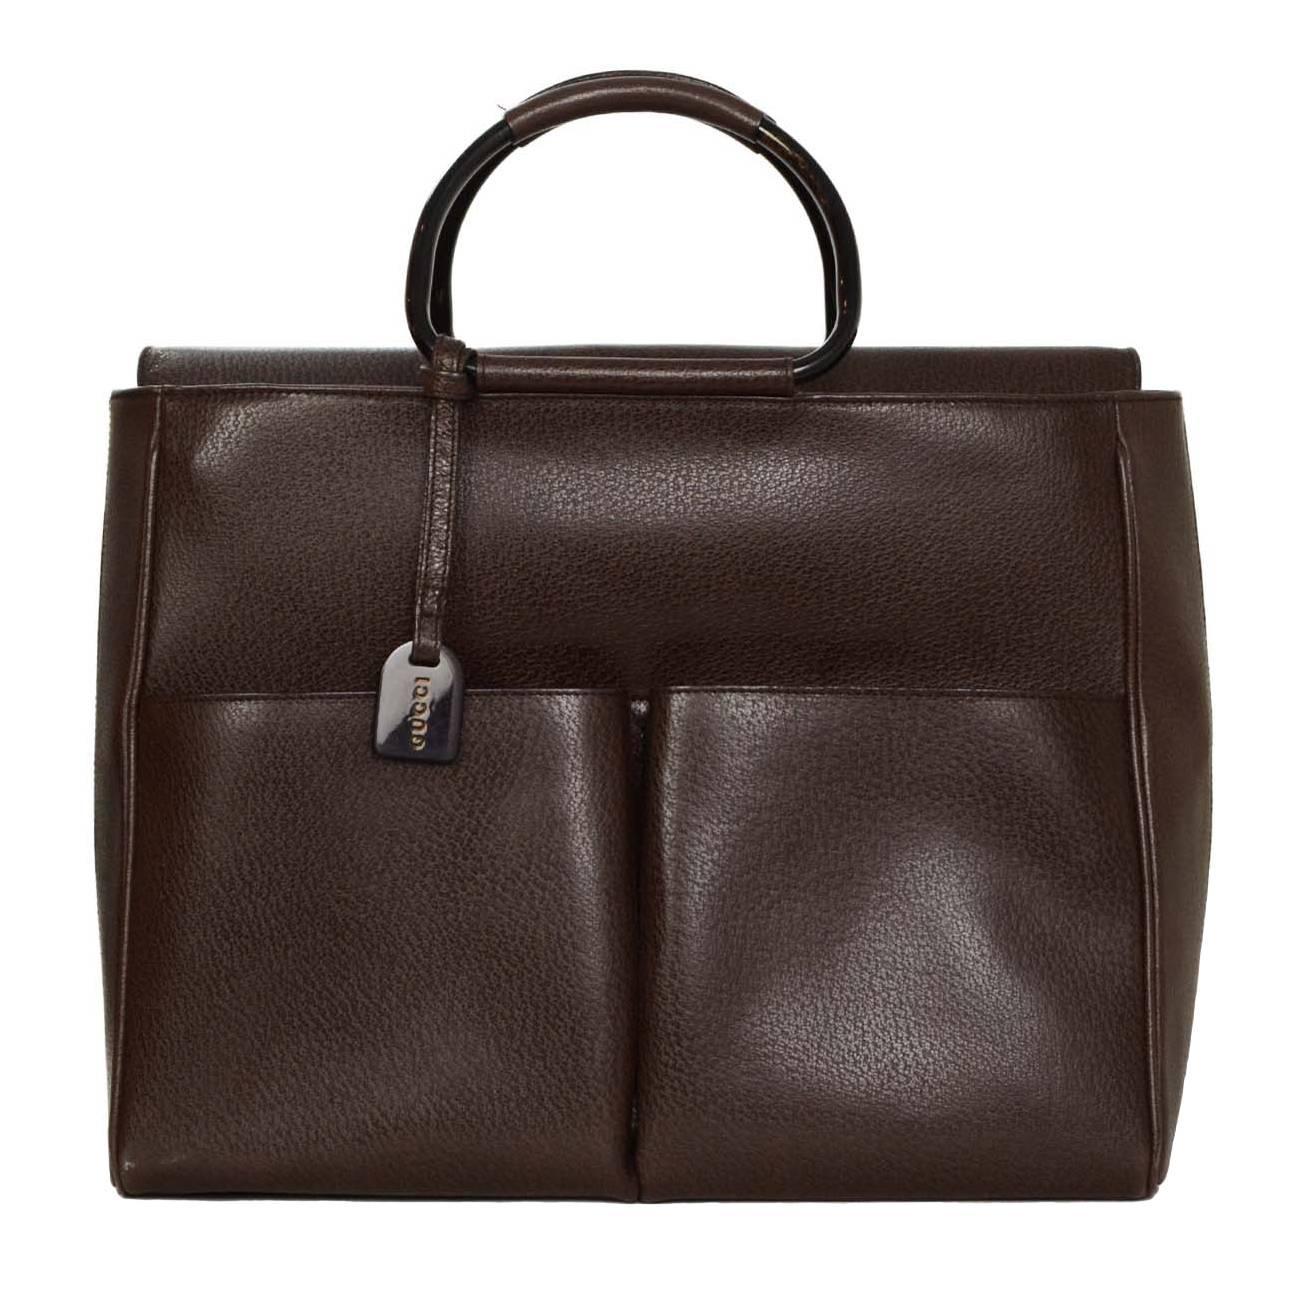 Gucci Brown Leather Tote Bag BHW at 1stdibs